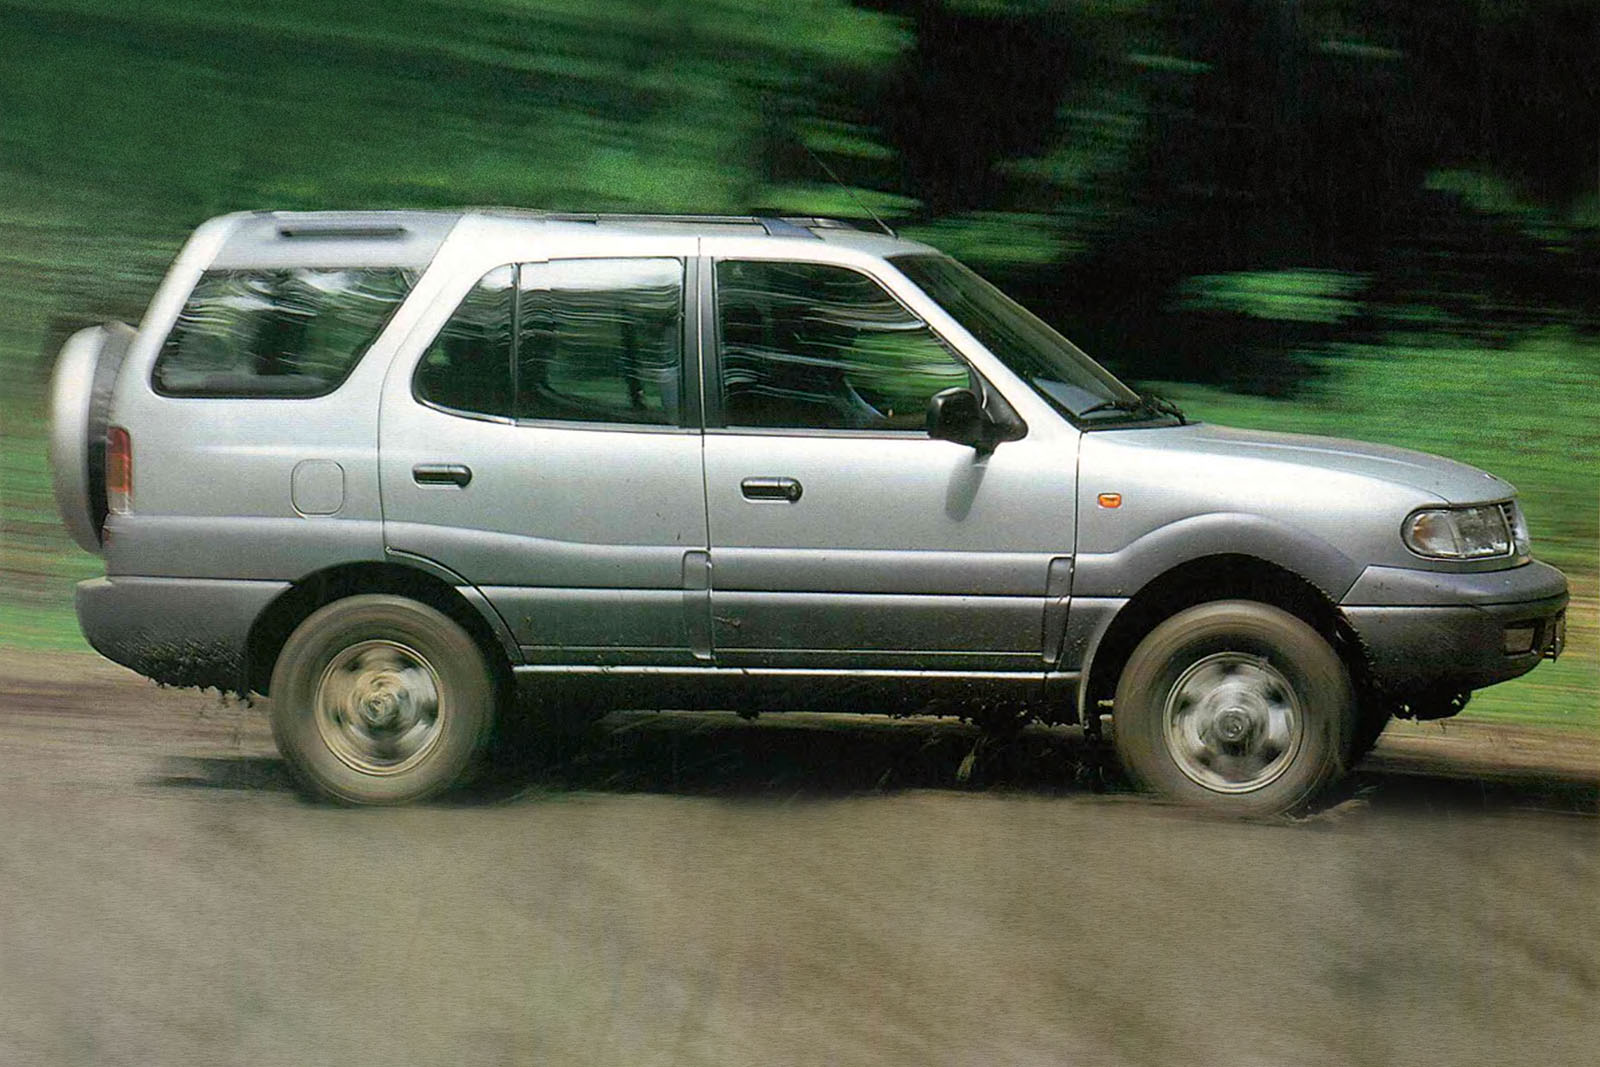 File:00 SsangYong Musso.jpg - Wikimedia Commons